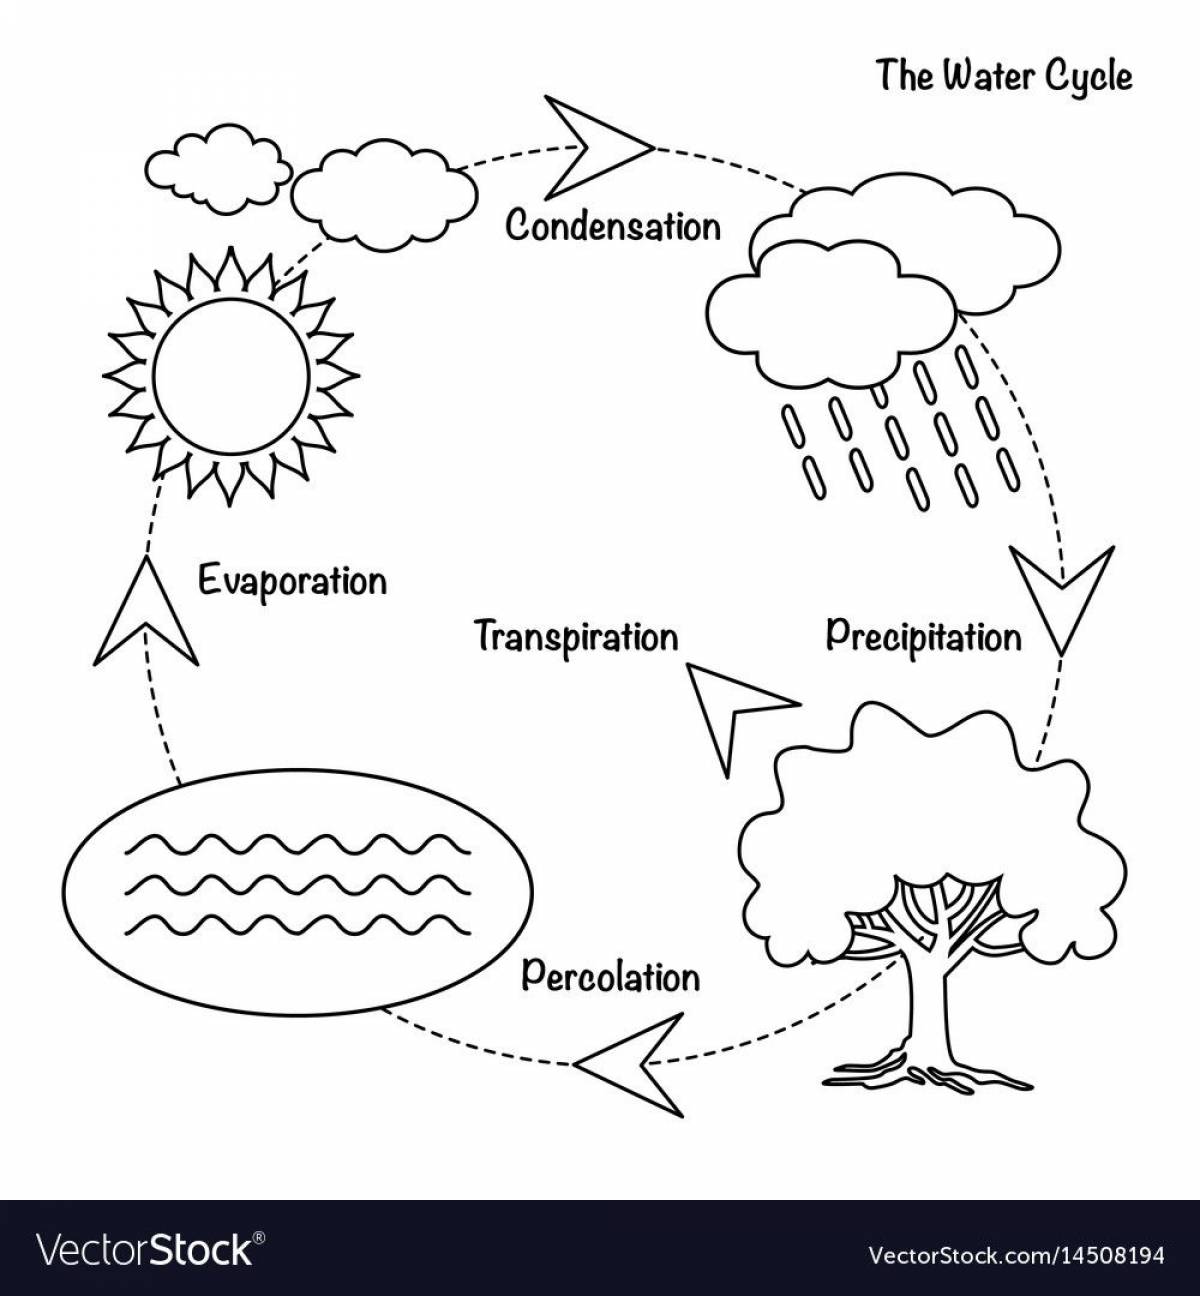 The water cycle for kids #12